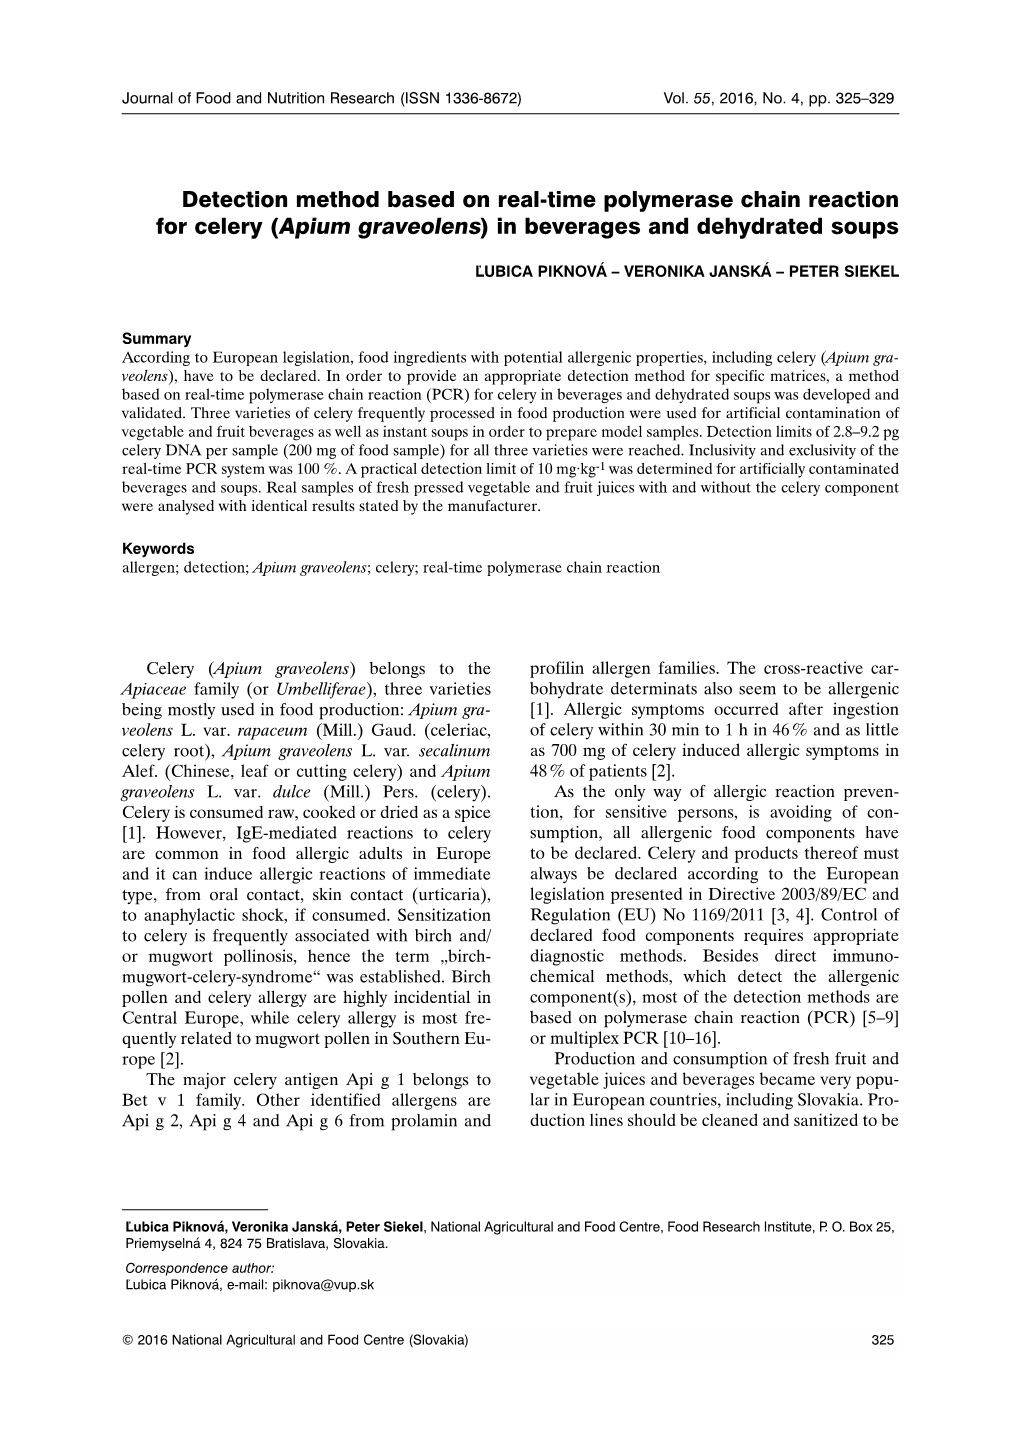 Detection Method Based on Real-Time Polymerase Chain Reaction for Celery (Apium Graveolens) in Beverages and Dehydrated Soups